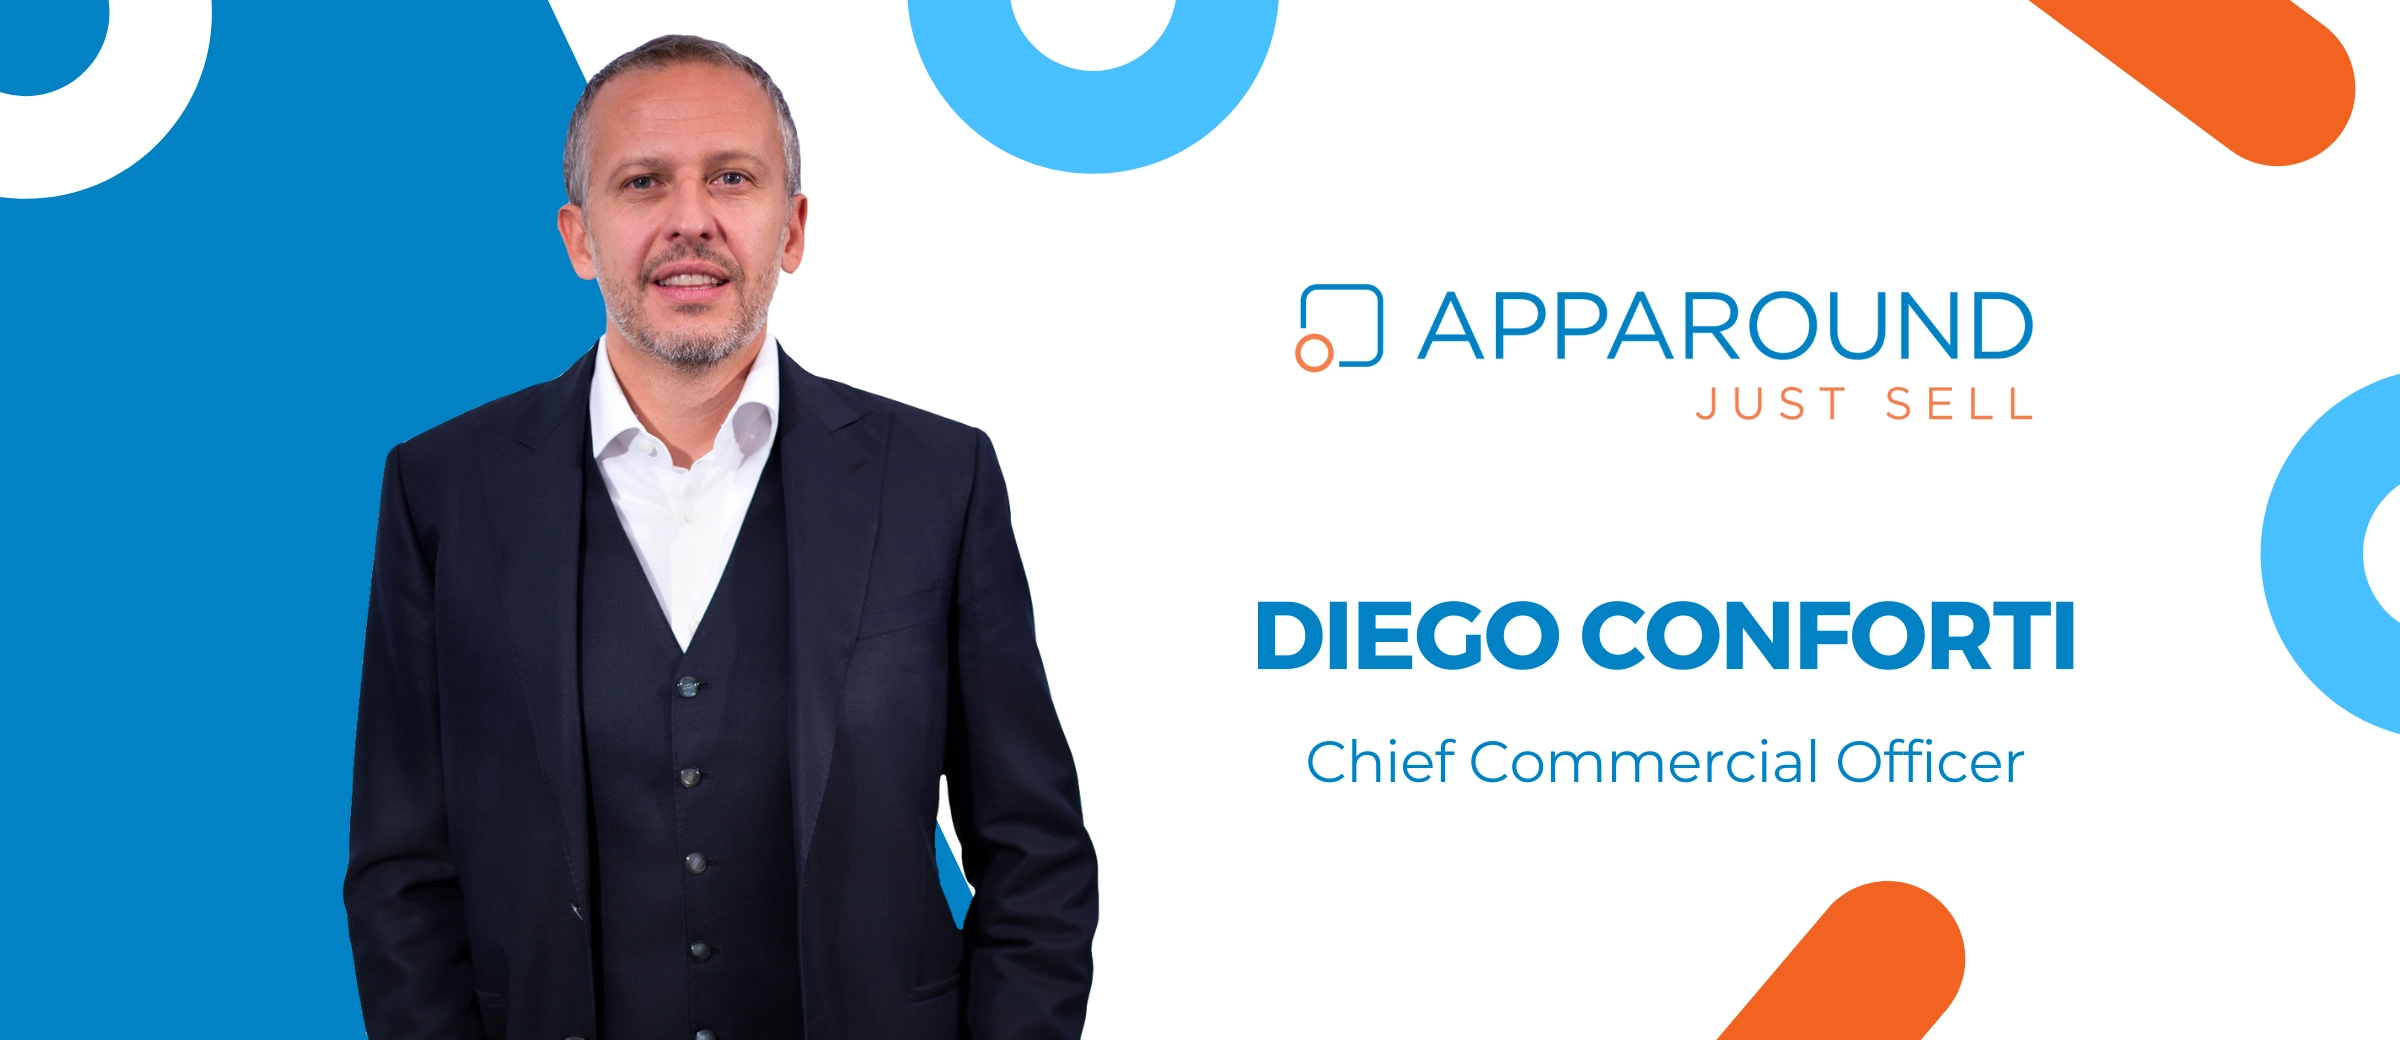 Diego Conforti is the new Commercial Director of Apparound